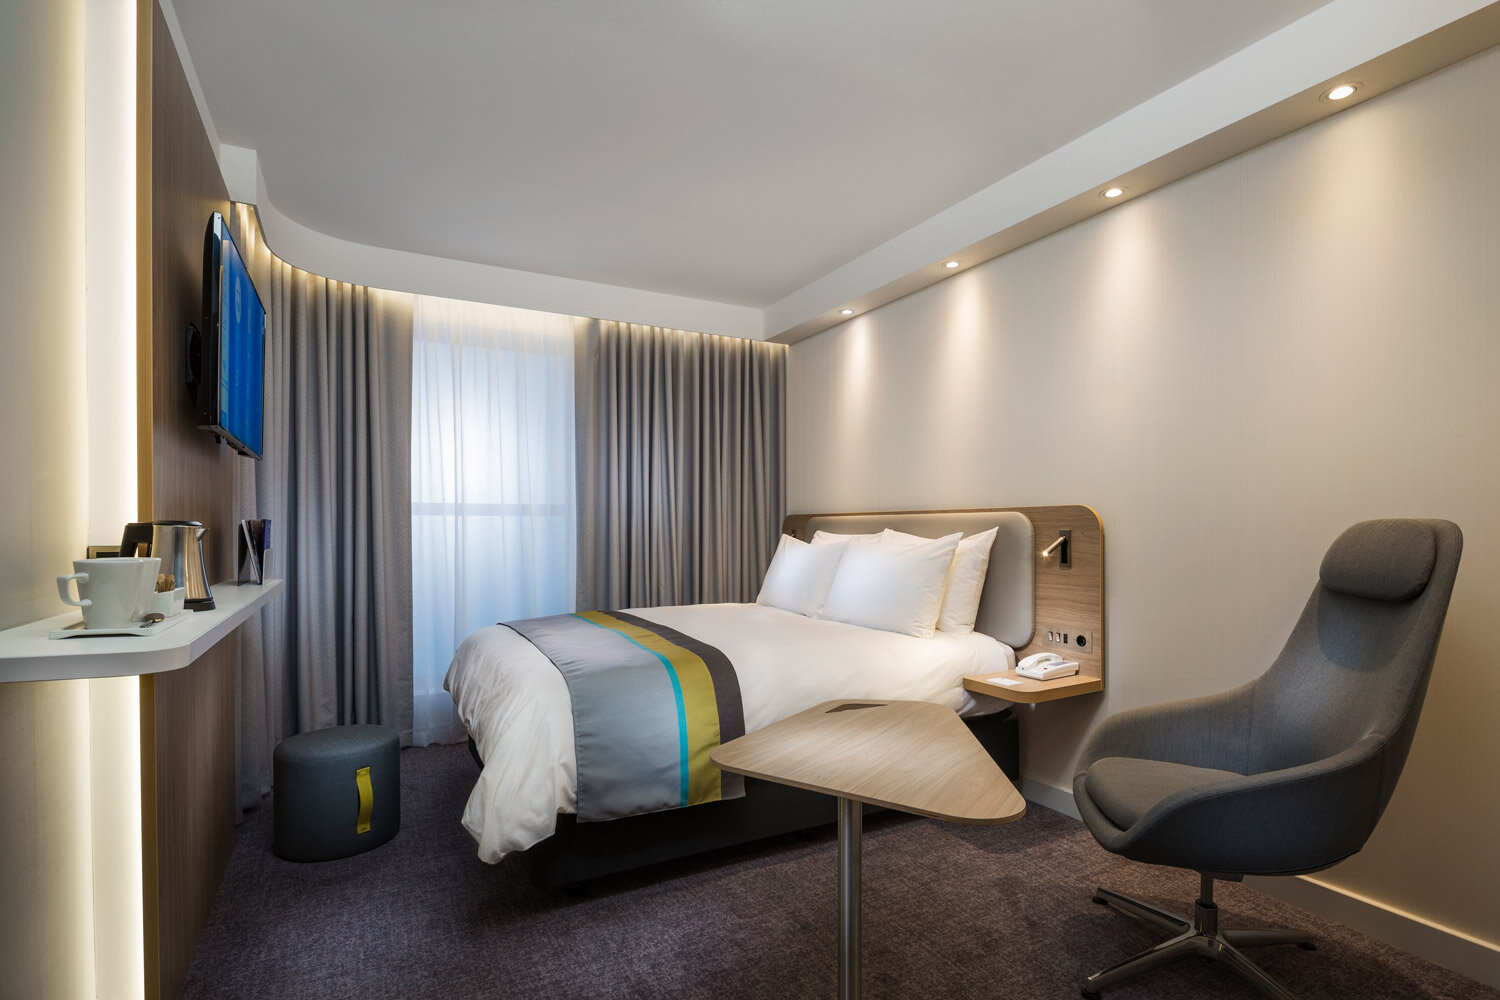 IHG-holiday-inn-express-bedrooms-by-visualeye